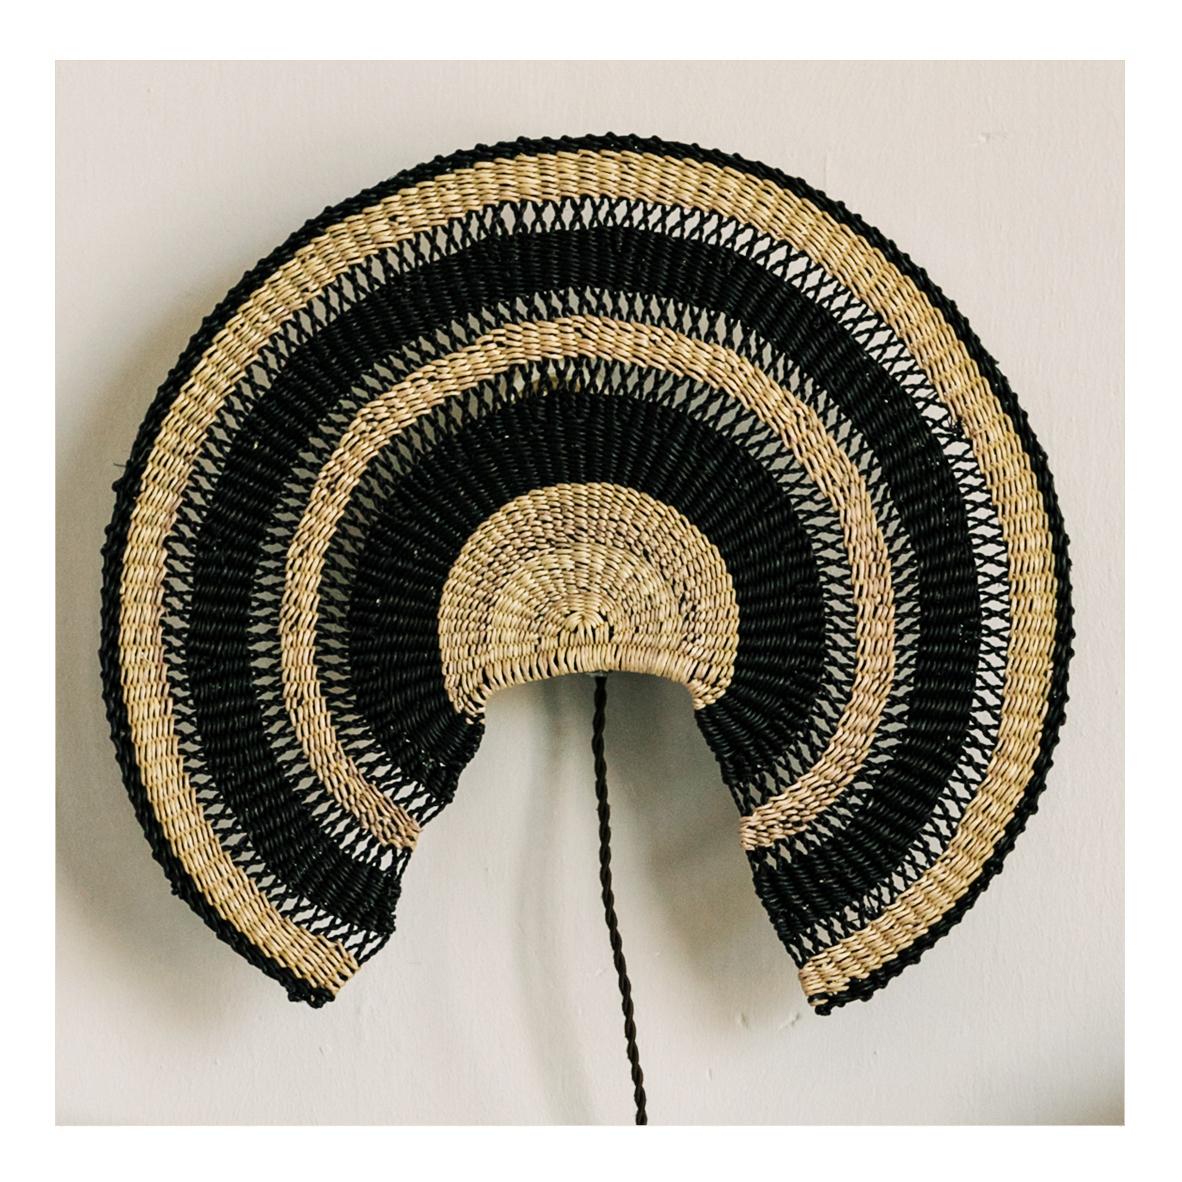 Wall lamp ADMIRADOR L: 
Seductive and effortless
Colour: Natural/Midnight (black),

Are you looking for a light that is also an ornament? Look no further with this large Wall Light based on a traditional fan. With it’s delicate weave it not only